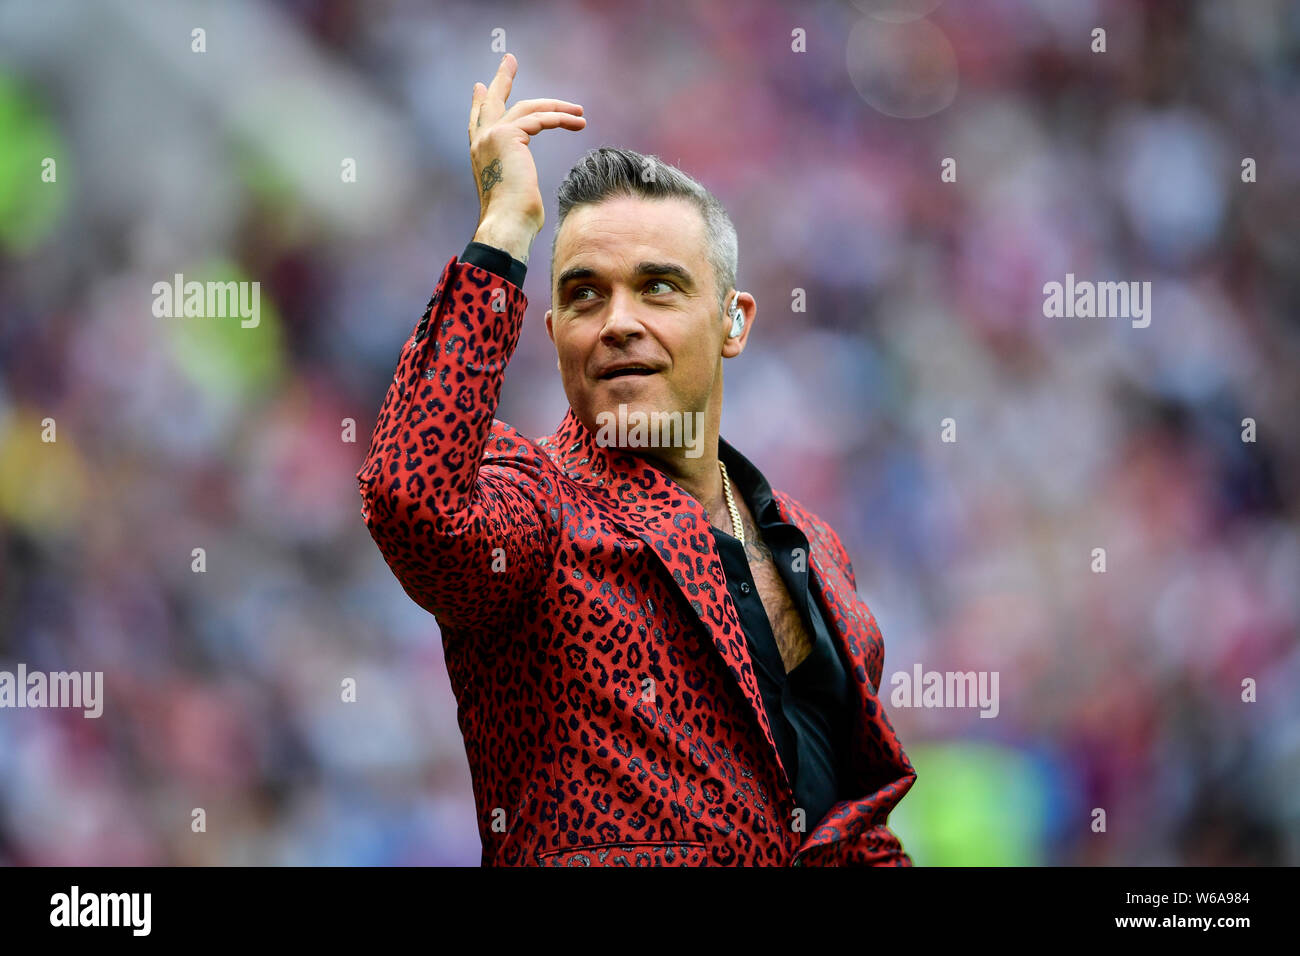 English singer Robbie Williams performs during the opening ceremony of the FIFA World Cup 2018 Russia in Moscow, Russia, 14 June 2018. Stock Photo